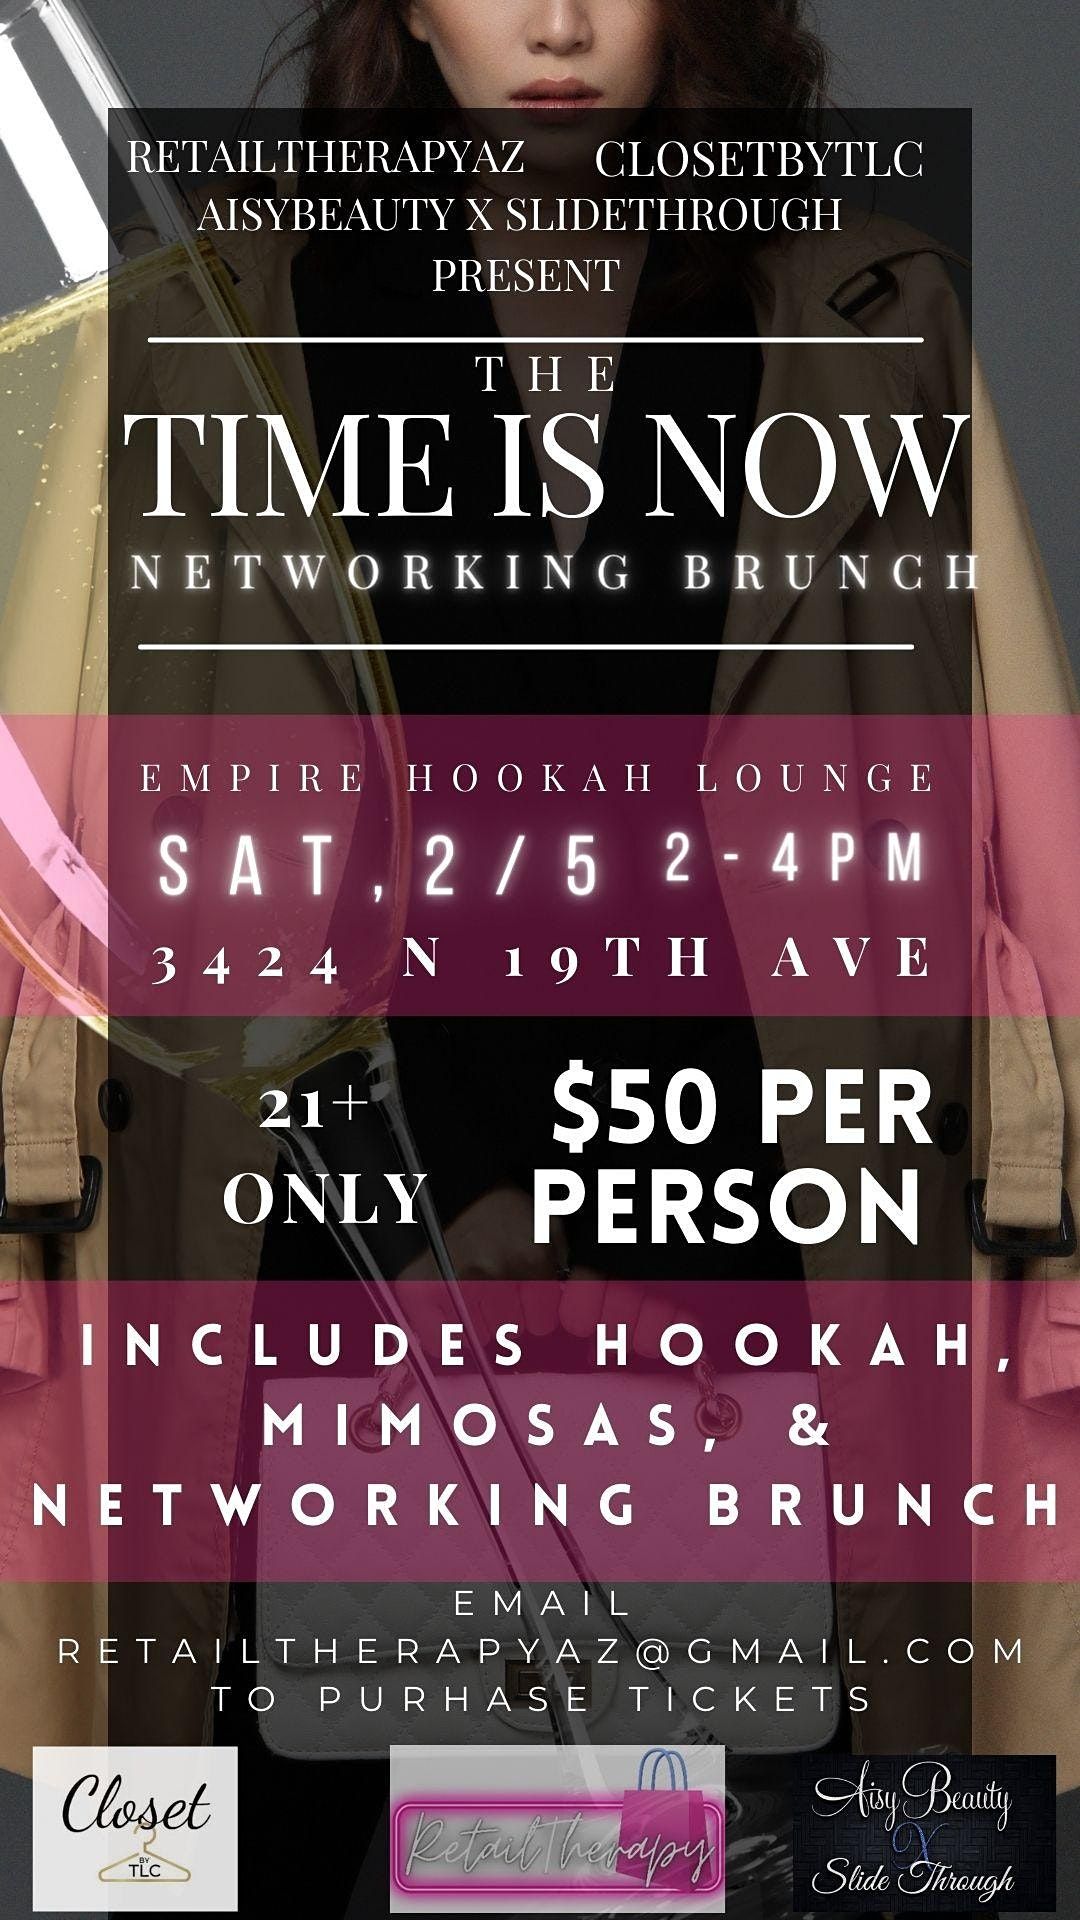 The Time is Now Networking Brunch